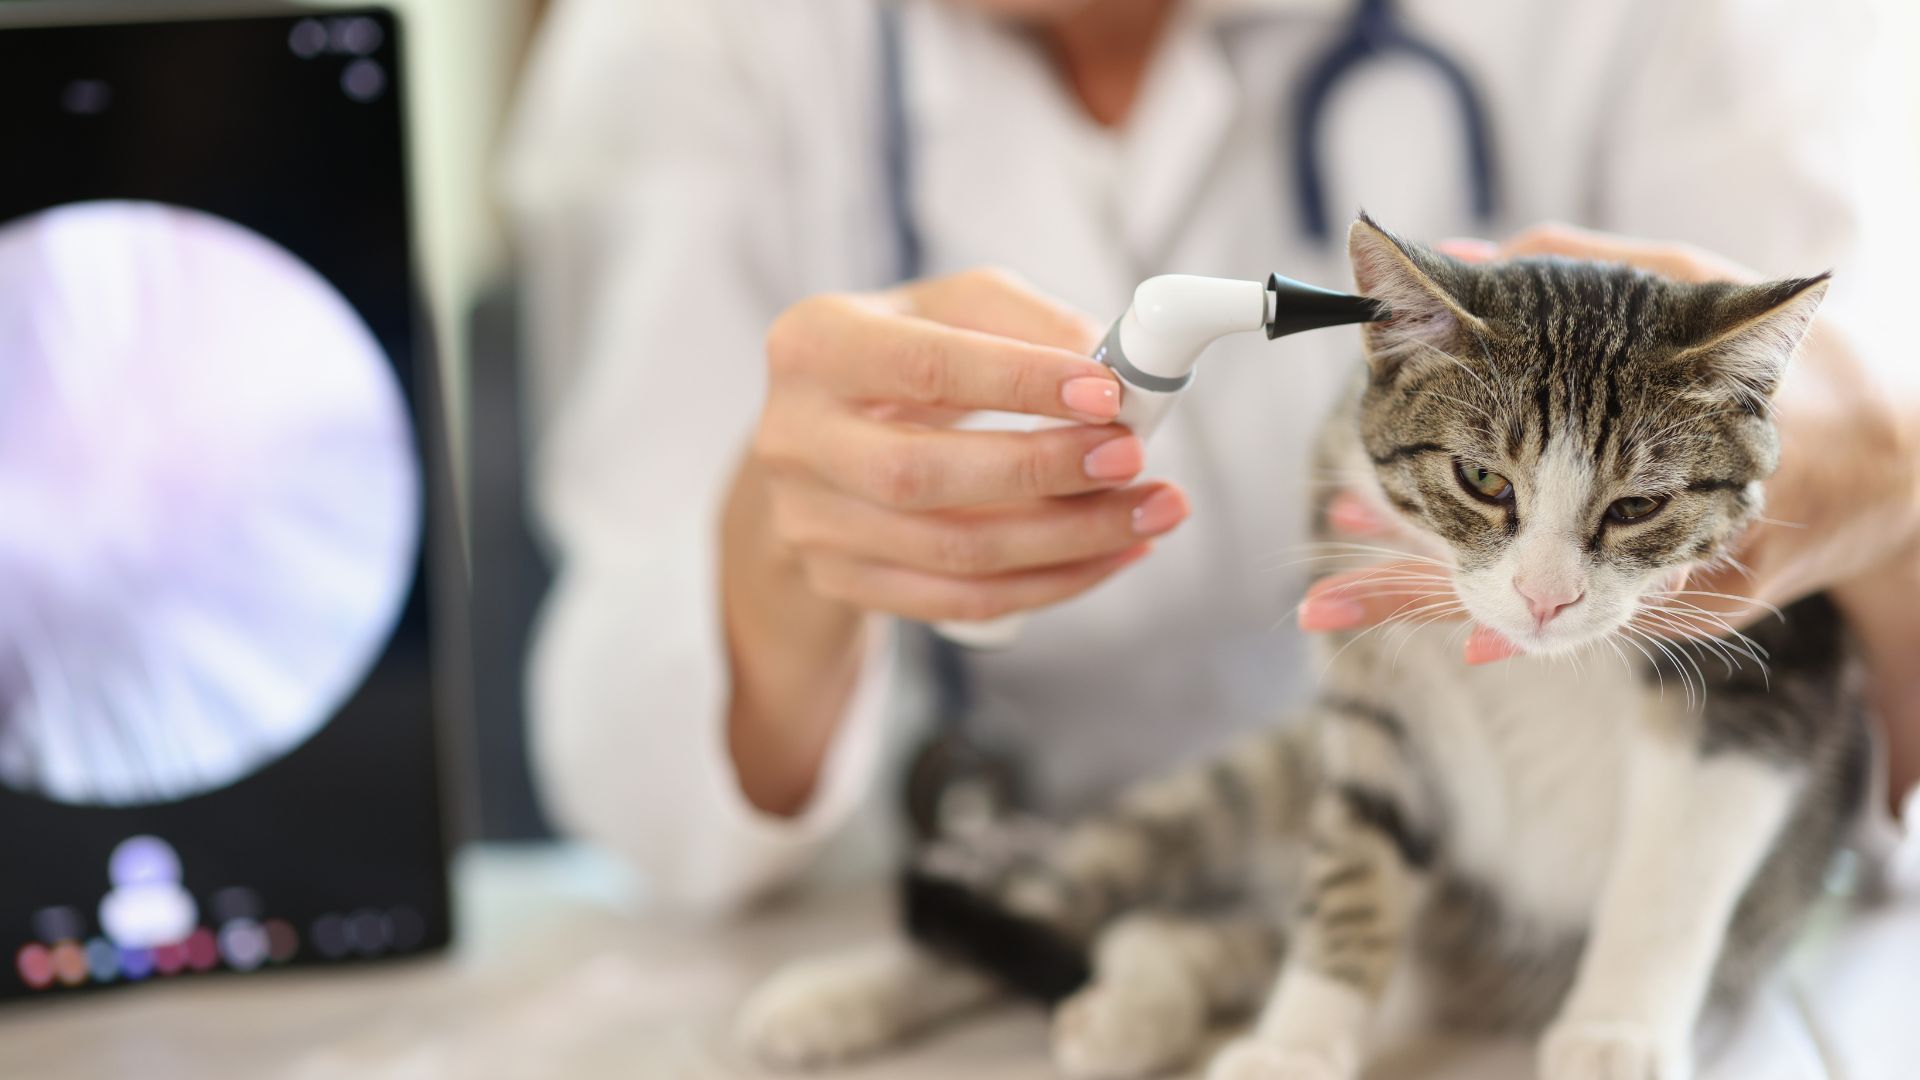 Examination of cat ear in veterinary clinic using an otoscope problems and ear pain in animals